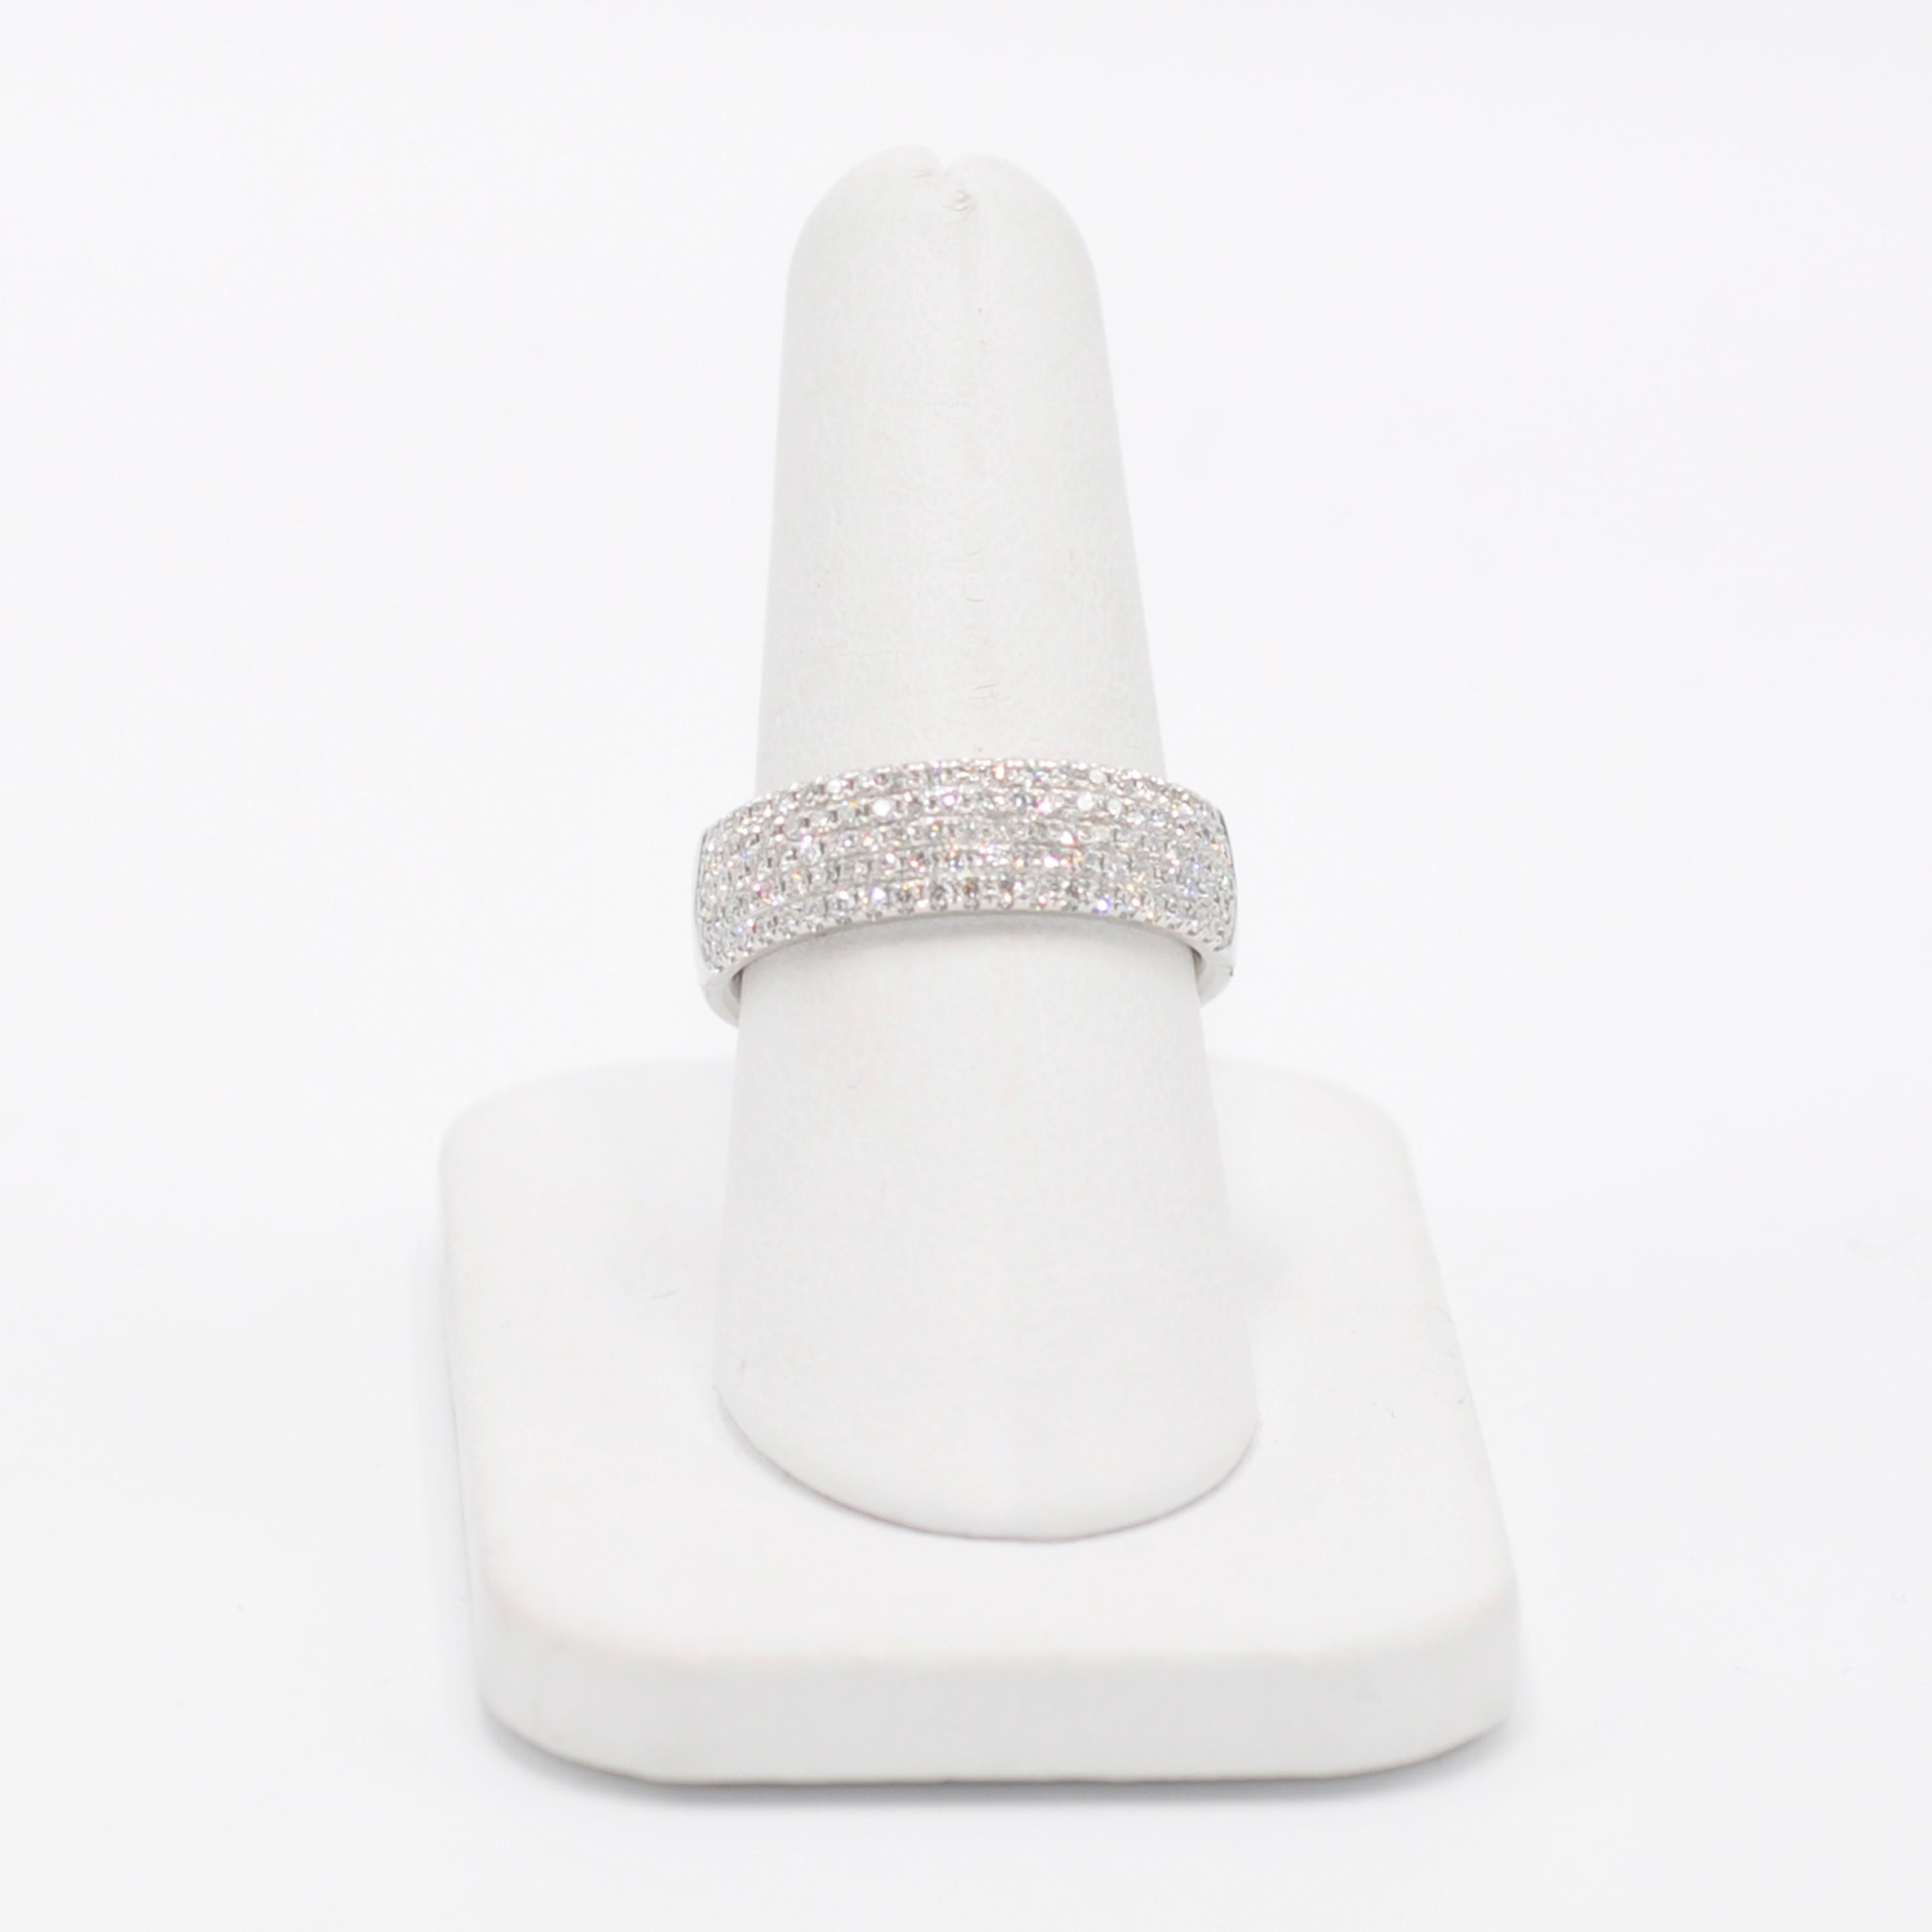 Beautifully brilliant Tiffany 18 Karat white gold pave diamond ring. Spanning from edge to edge .85cts of pave diamonds wrap half way around the ring. Add a little sparkle!

Stamped '©Tiffany&Co. 750 Belgium'

Size 8